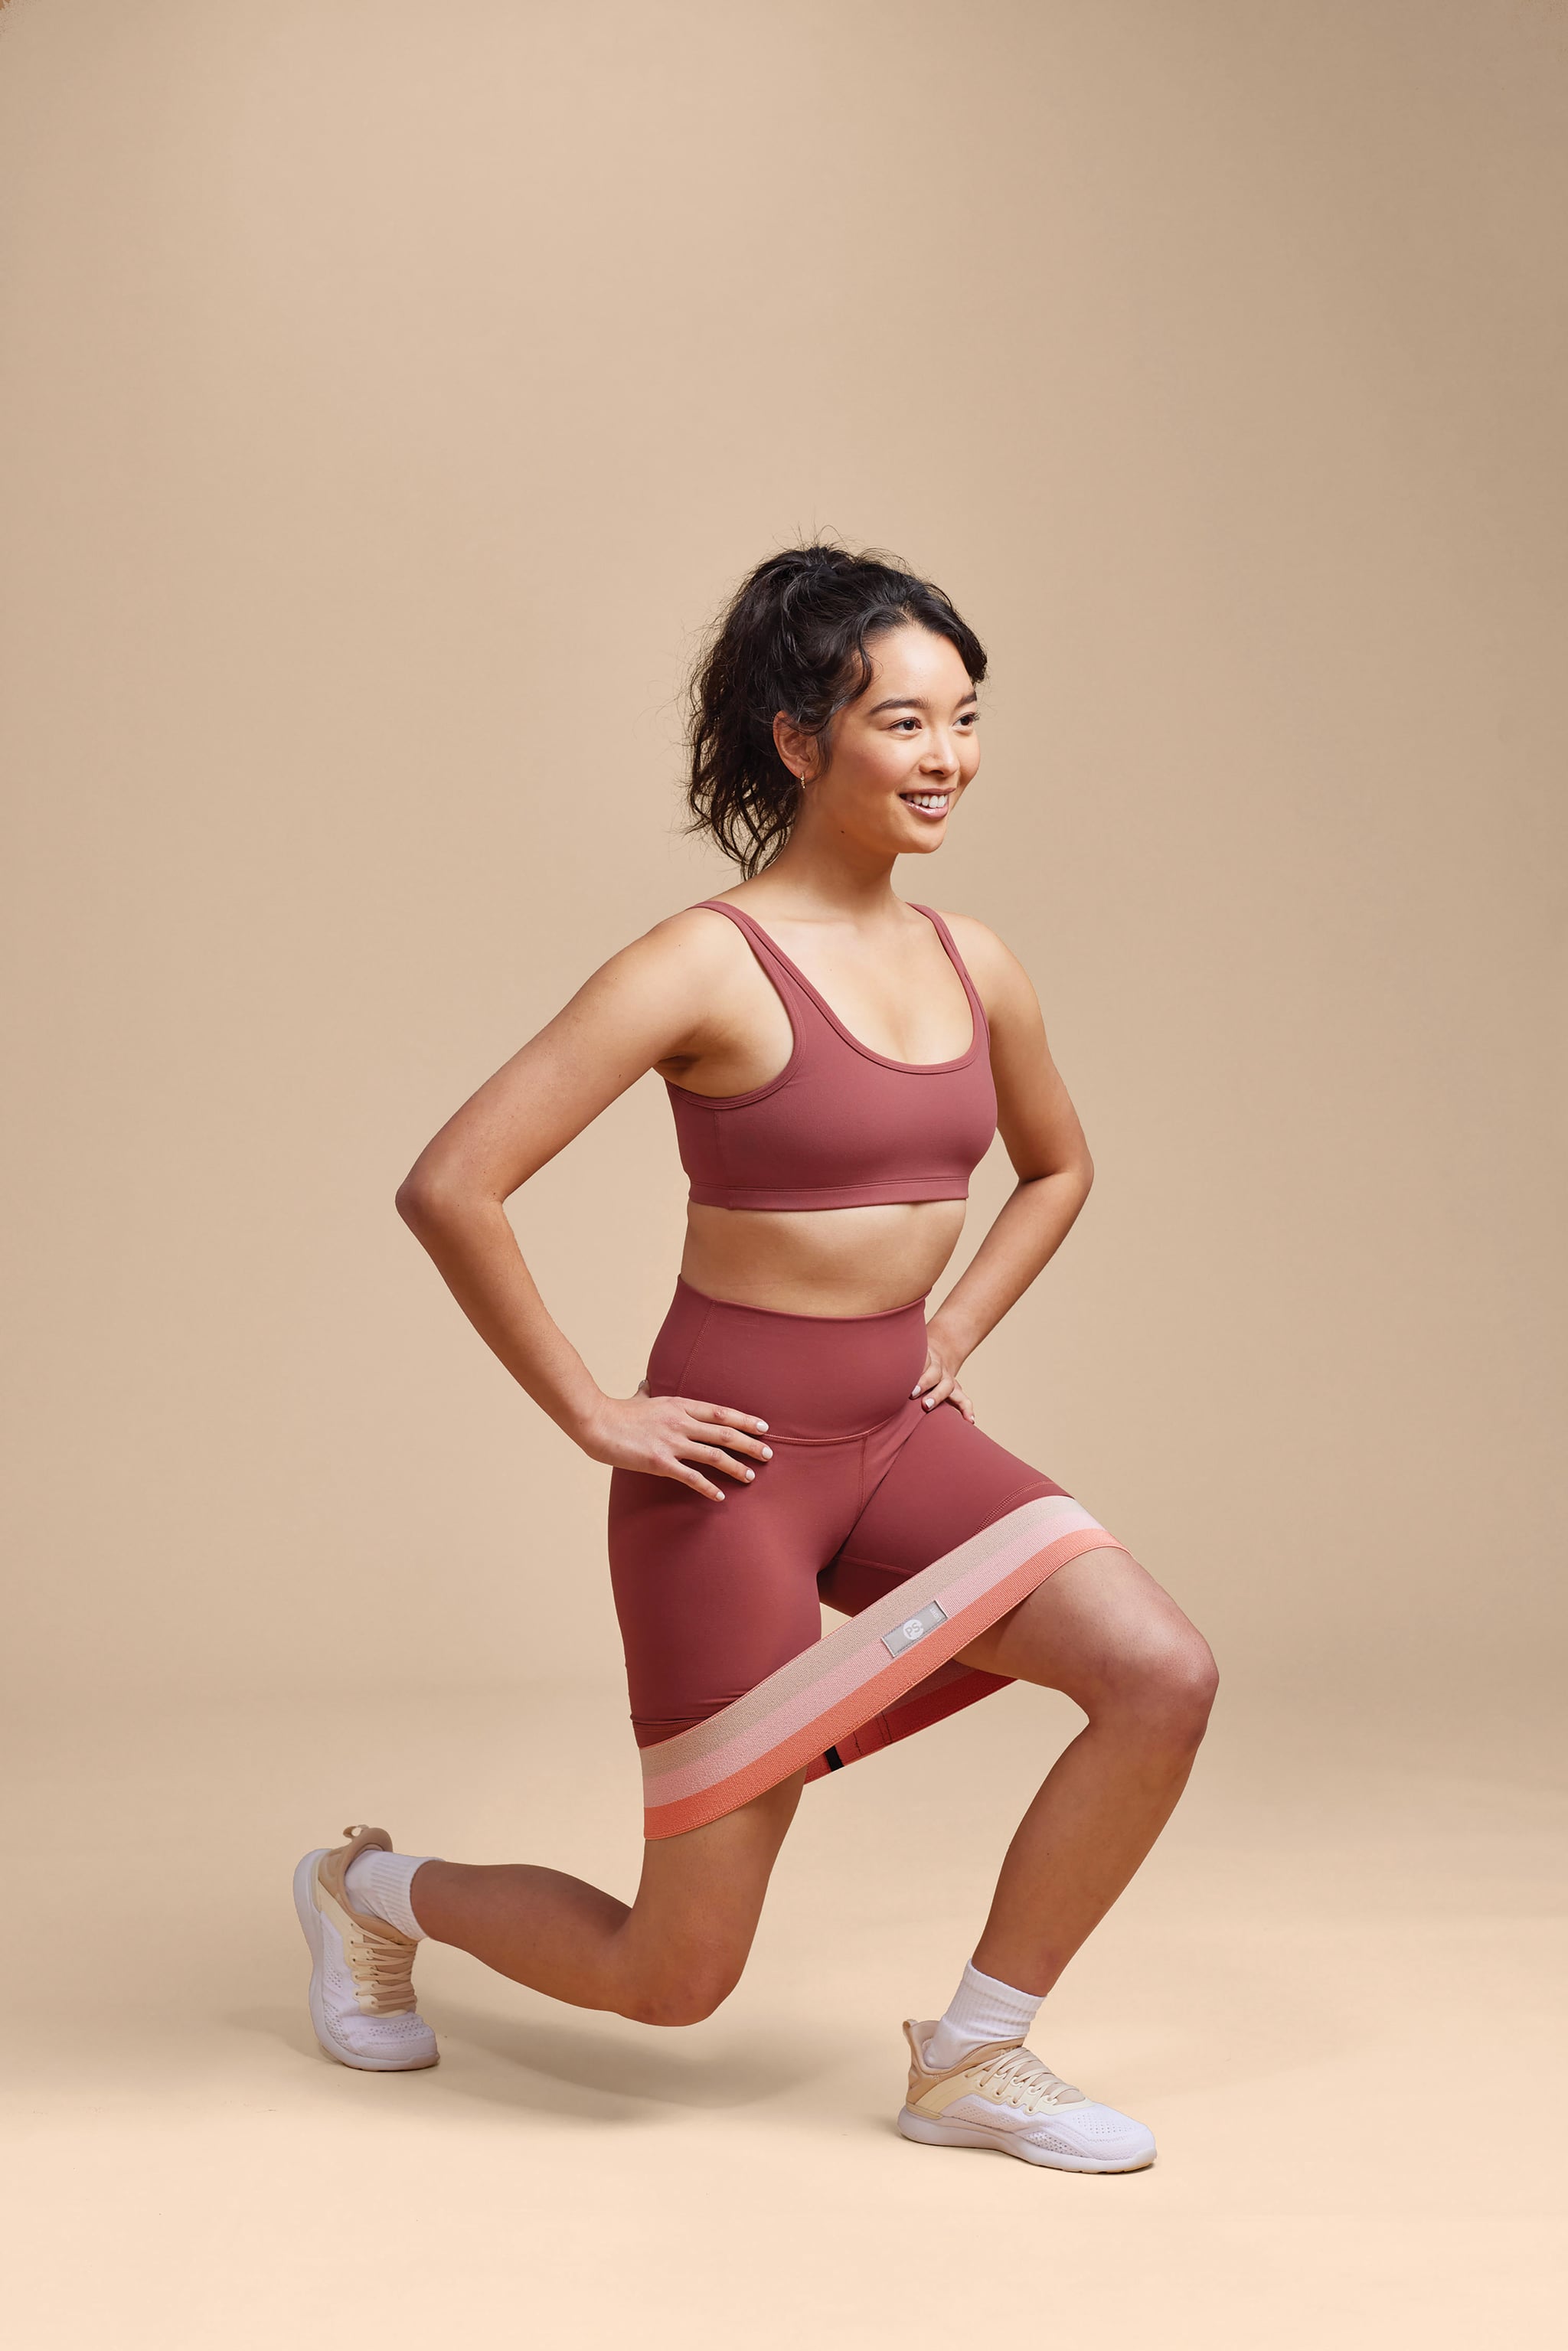 Shop the POPSUGAR Fitness Collection at Walmart